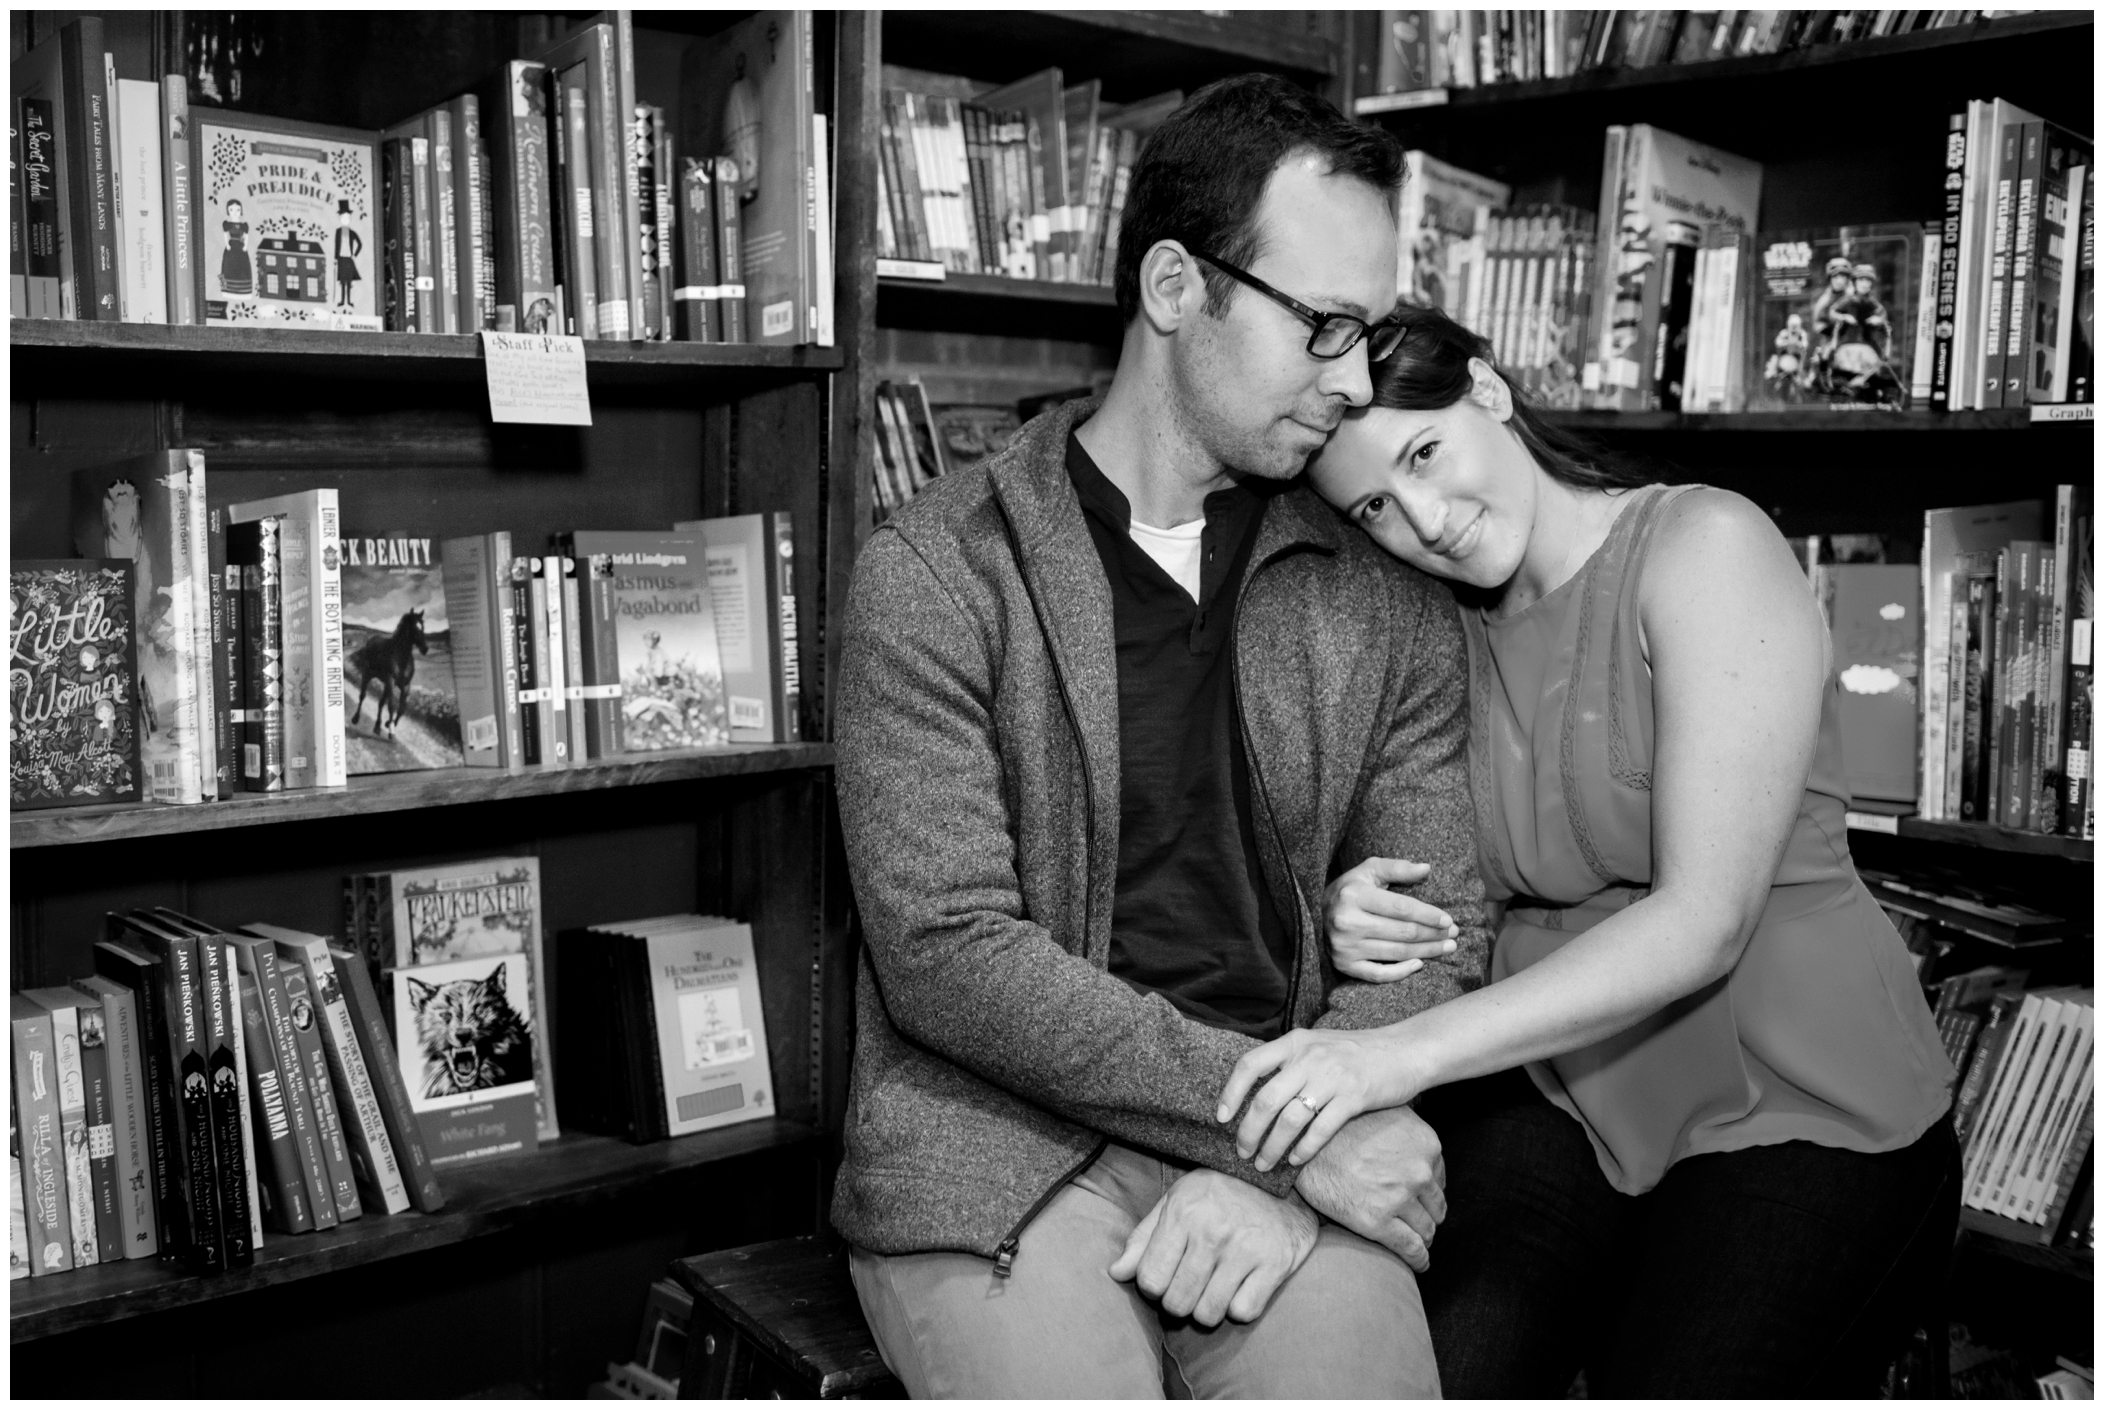 picture of tattered cover engagement photos 